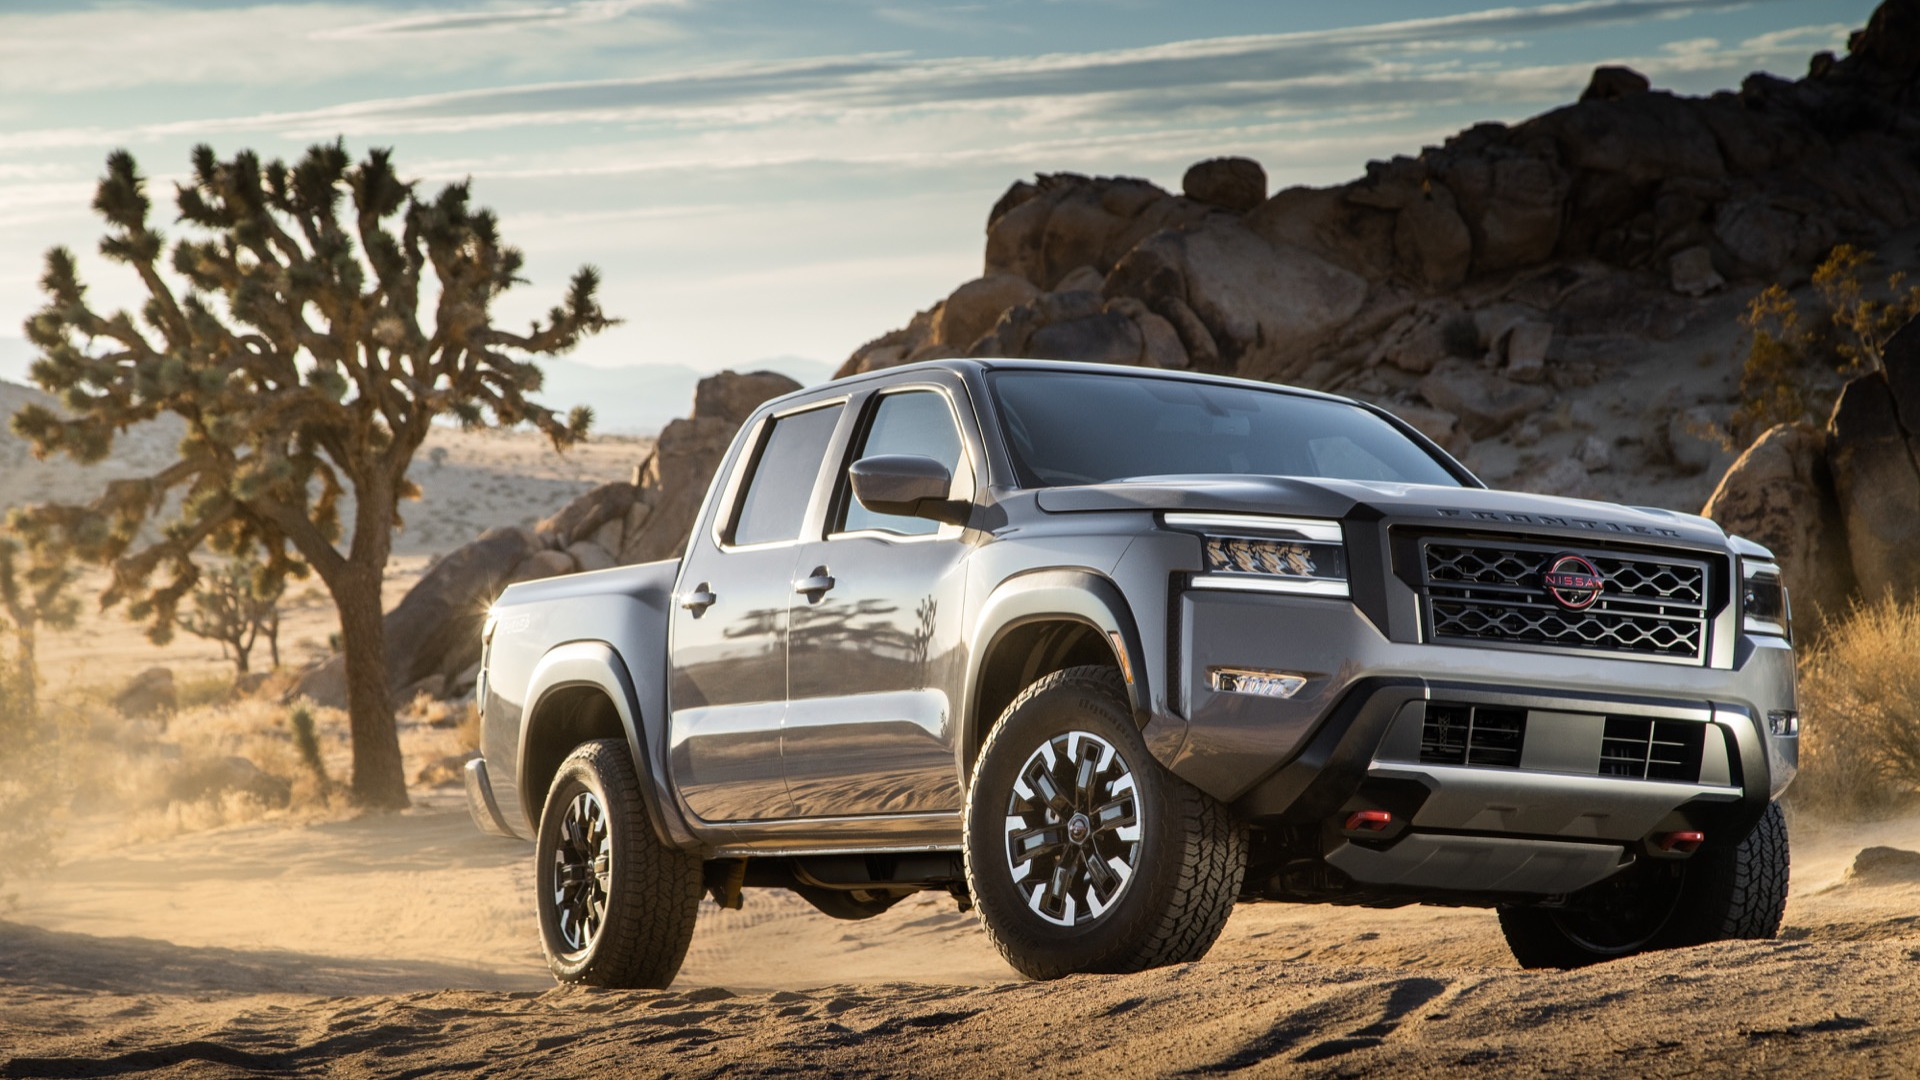 Preview: 2022 Nissan Frontier arrives with bold looks, 310 hp